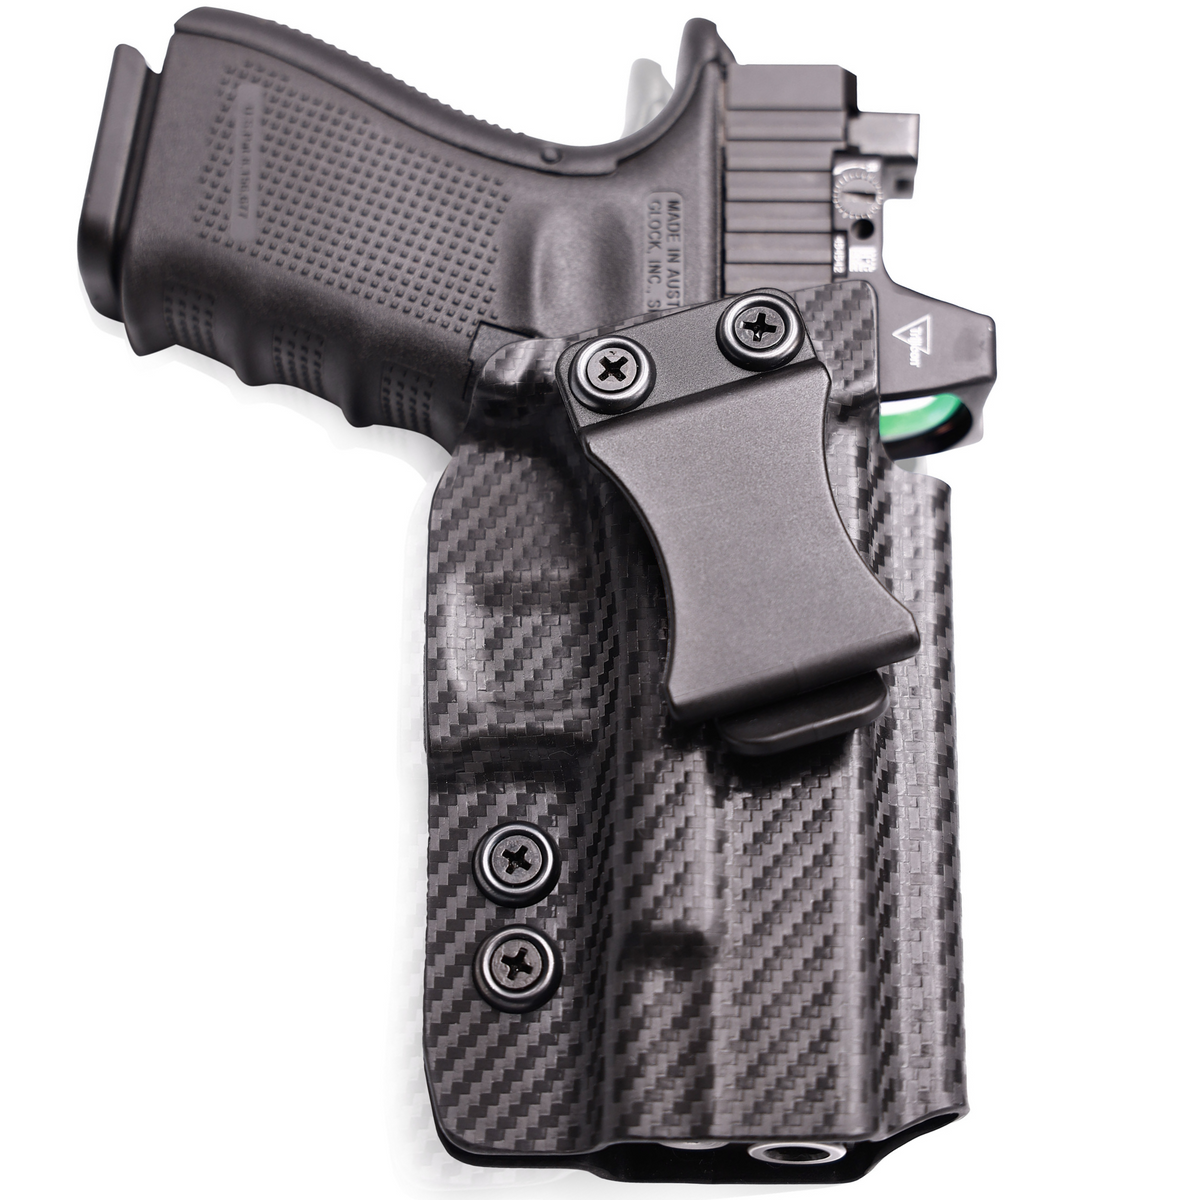 Glock IWB Holster - Optics/RMR Ready - Concealed Carry Holsters by